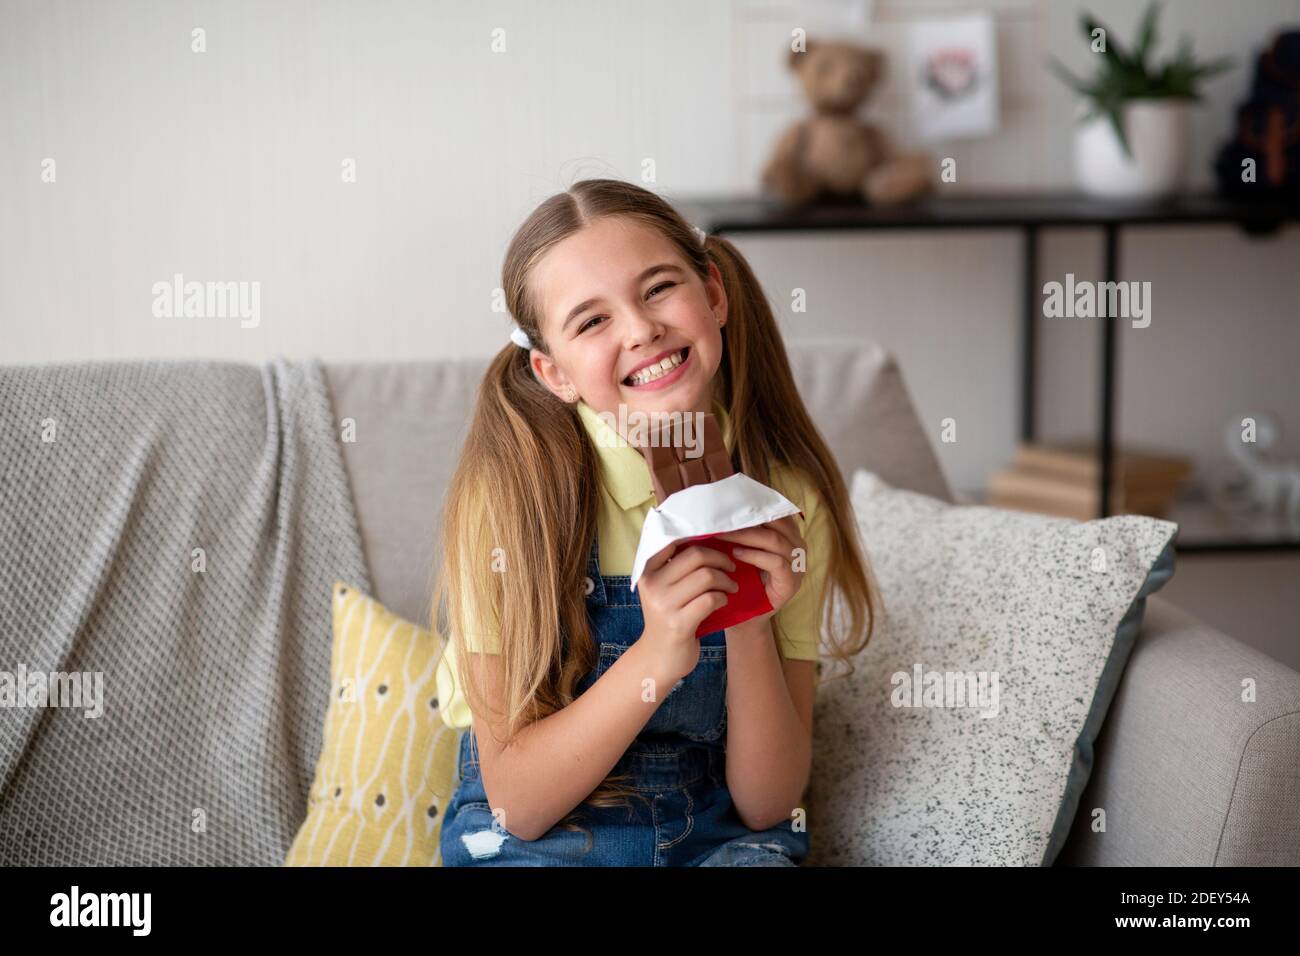 Girl eating chocolate bar sitting on a couch at home Stock Photo